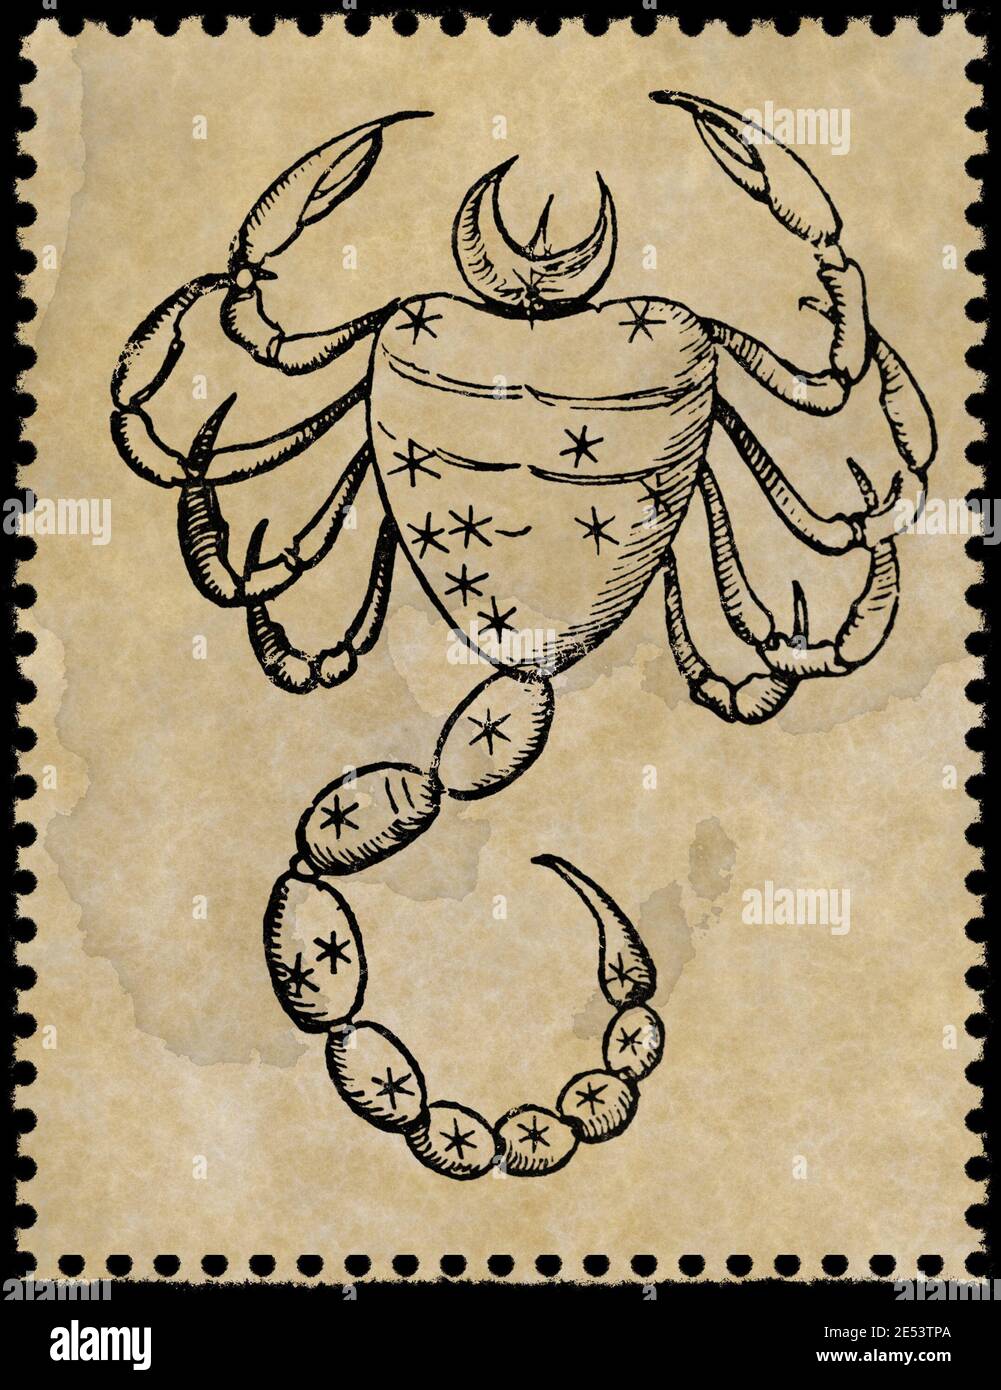 stamp with astrological symbols of the zodiac sign Scorpio Stock Photo